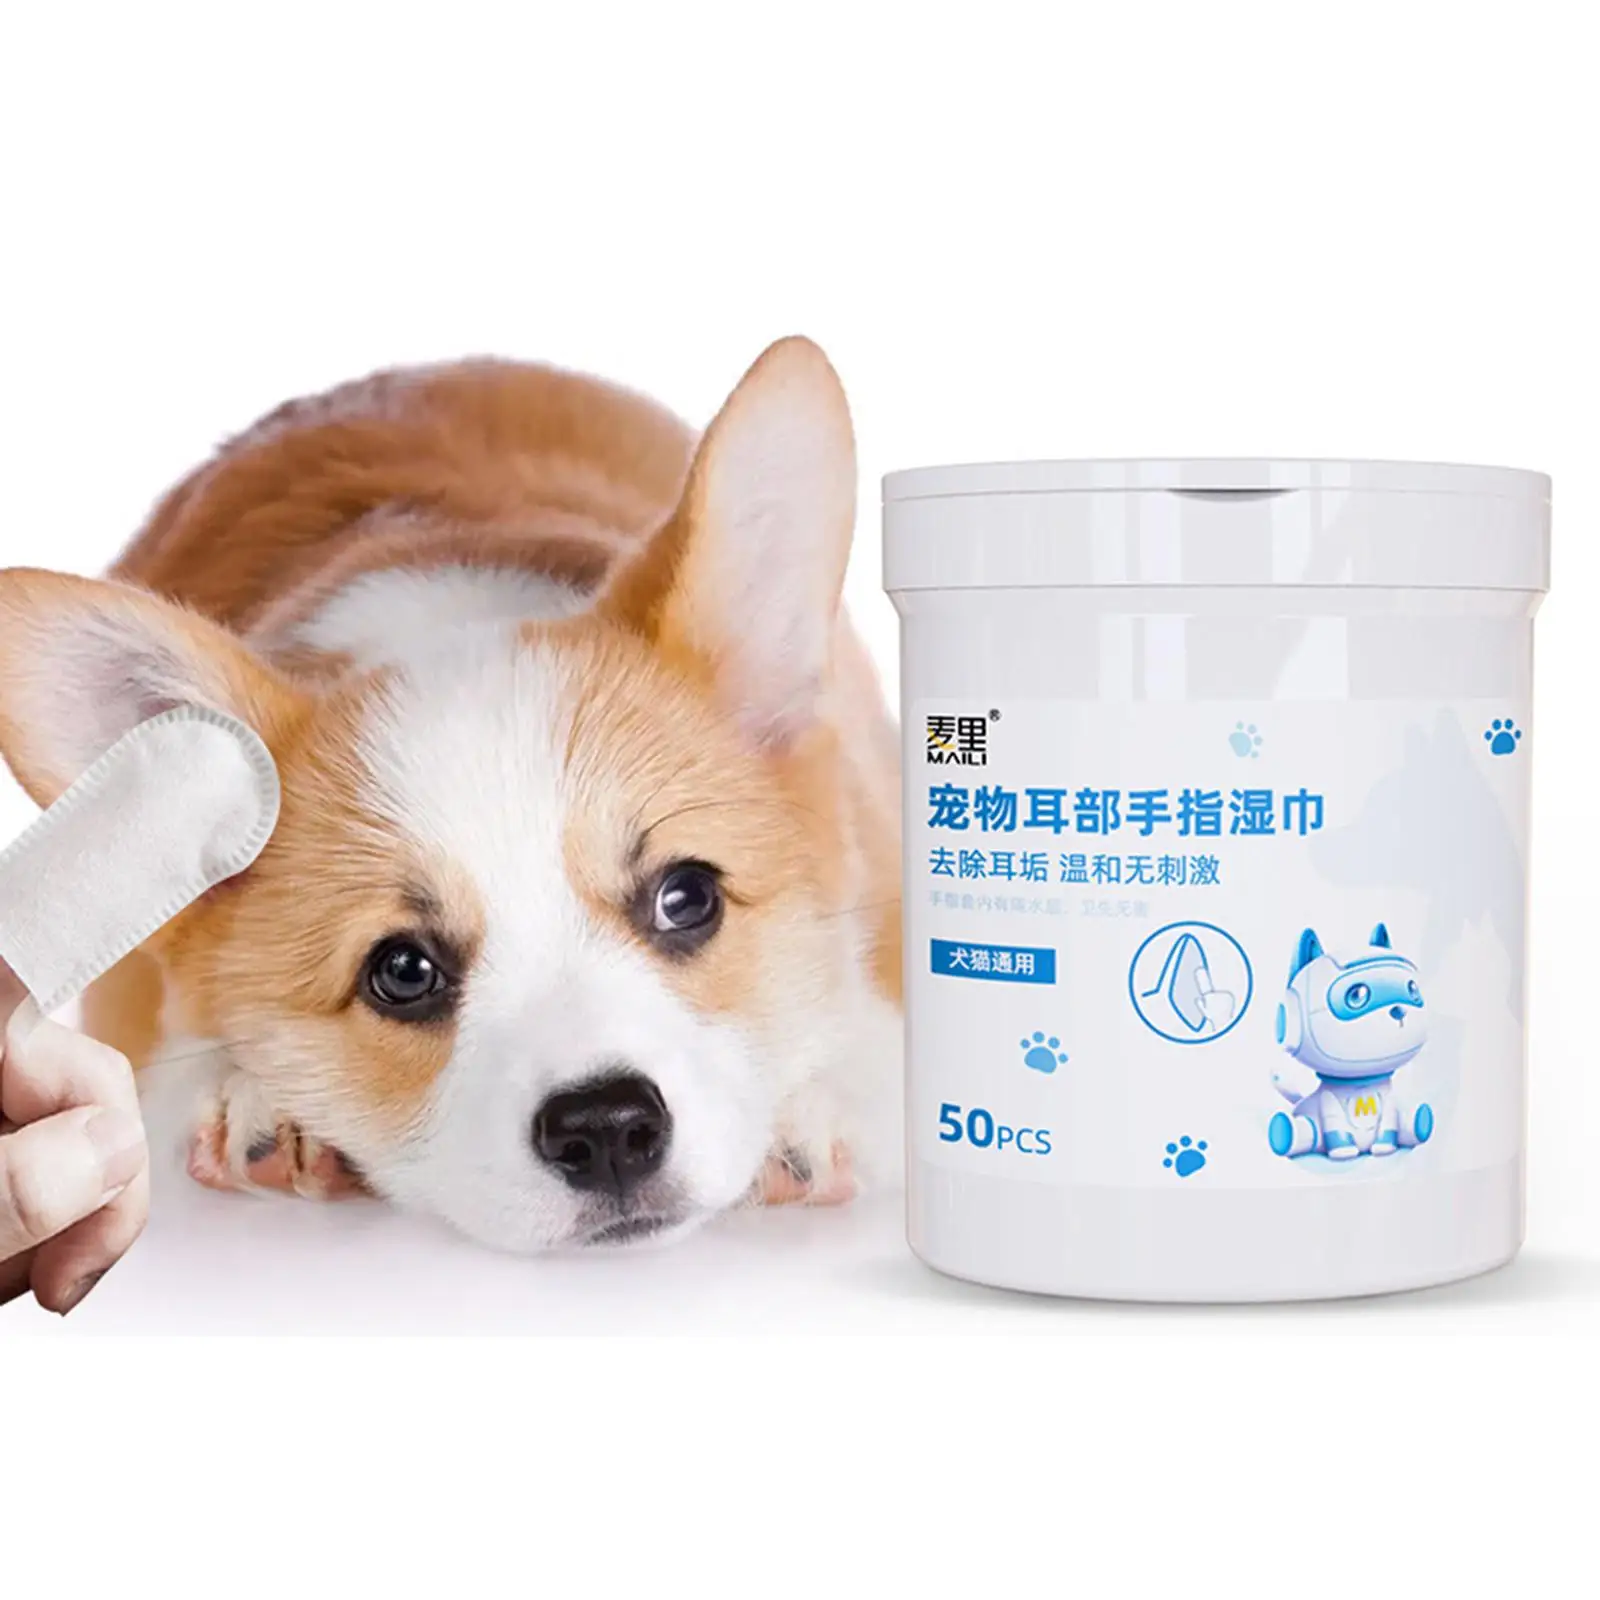 50Pcs Pet Dog Ear Finger Wipes Disposable Cat Eye Wipes Pads Soft Tear Stain Remover Puppy Wax Remover Pet Supplies Grooming